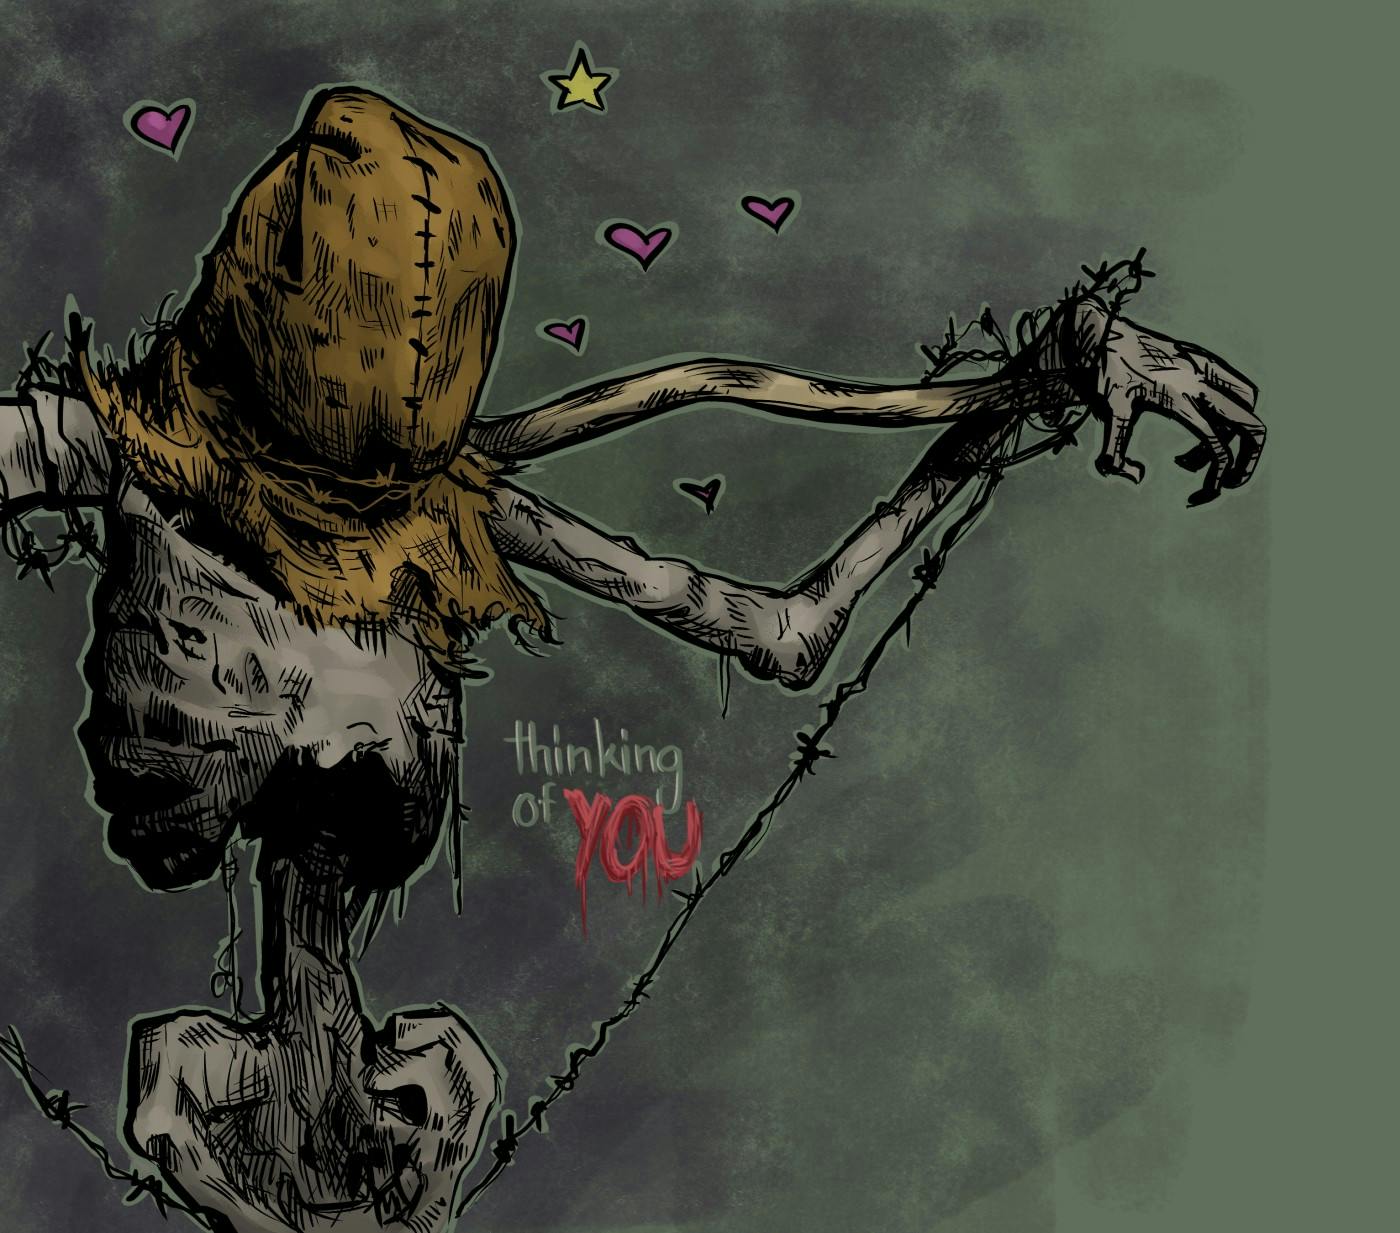 A digital illustration in comic book style of a scarecrow-like corpse attached to a stick by barbed wire, wearing a burlap sack on its head; it has little hearts around it and a small message says "thinking of you".